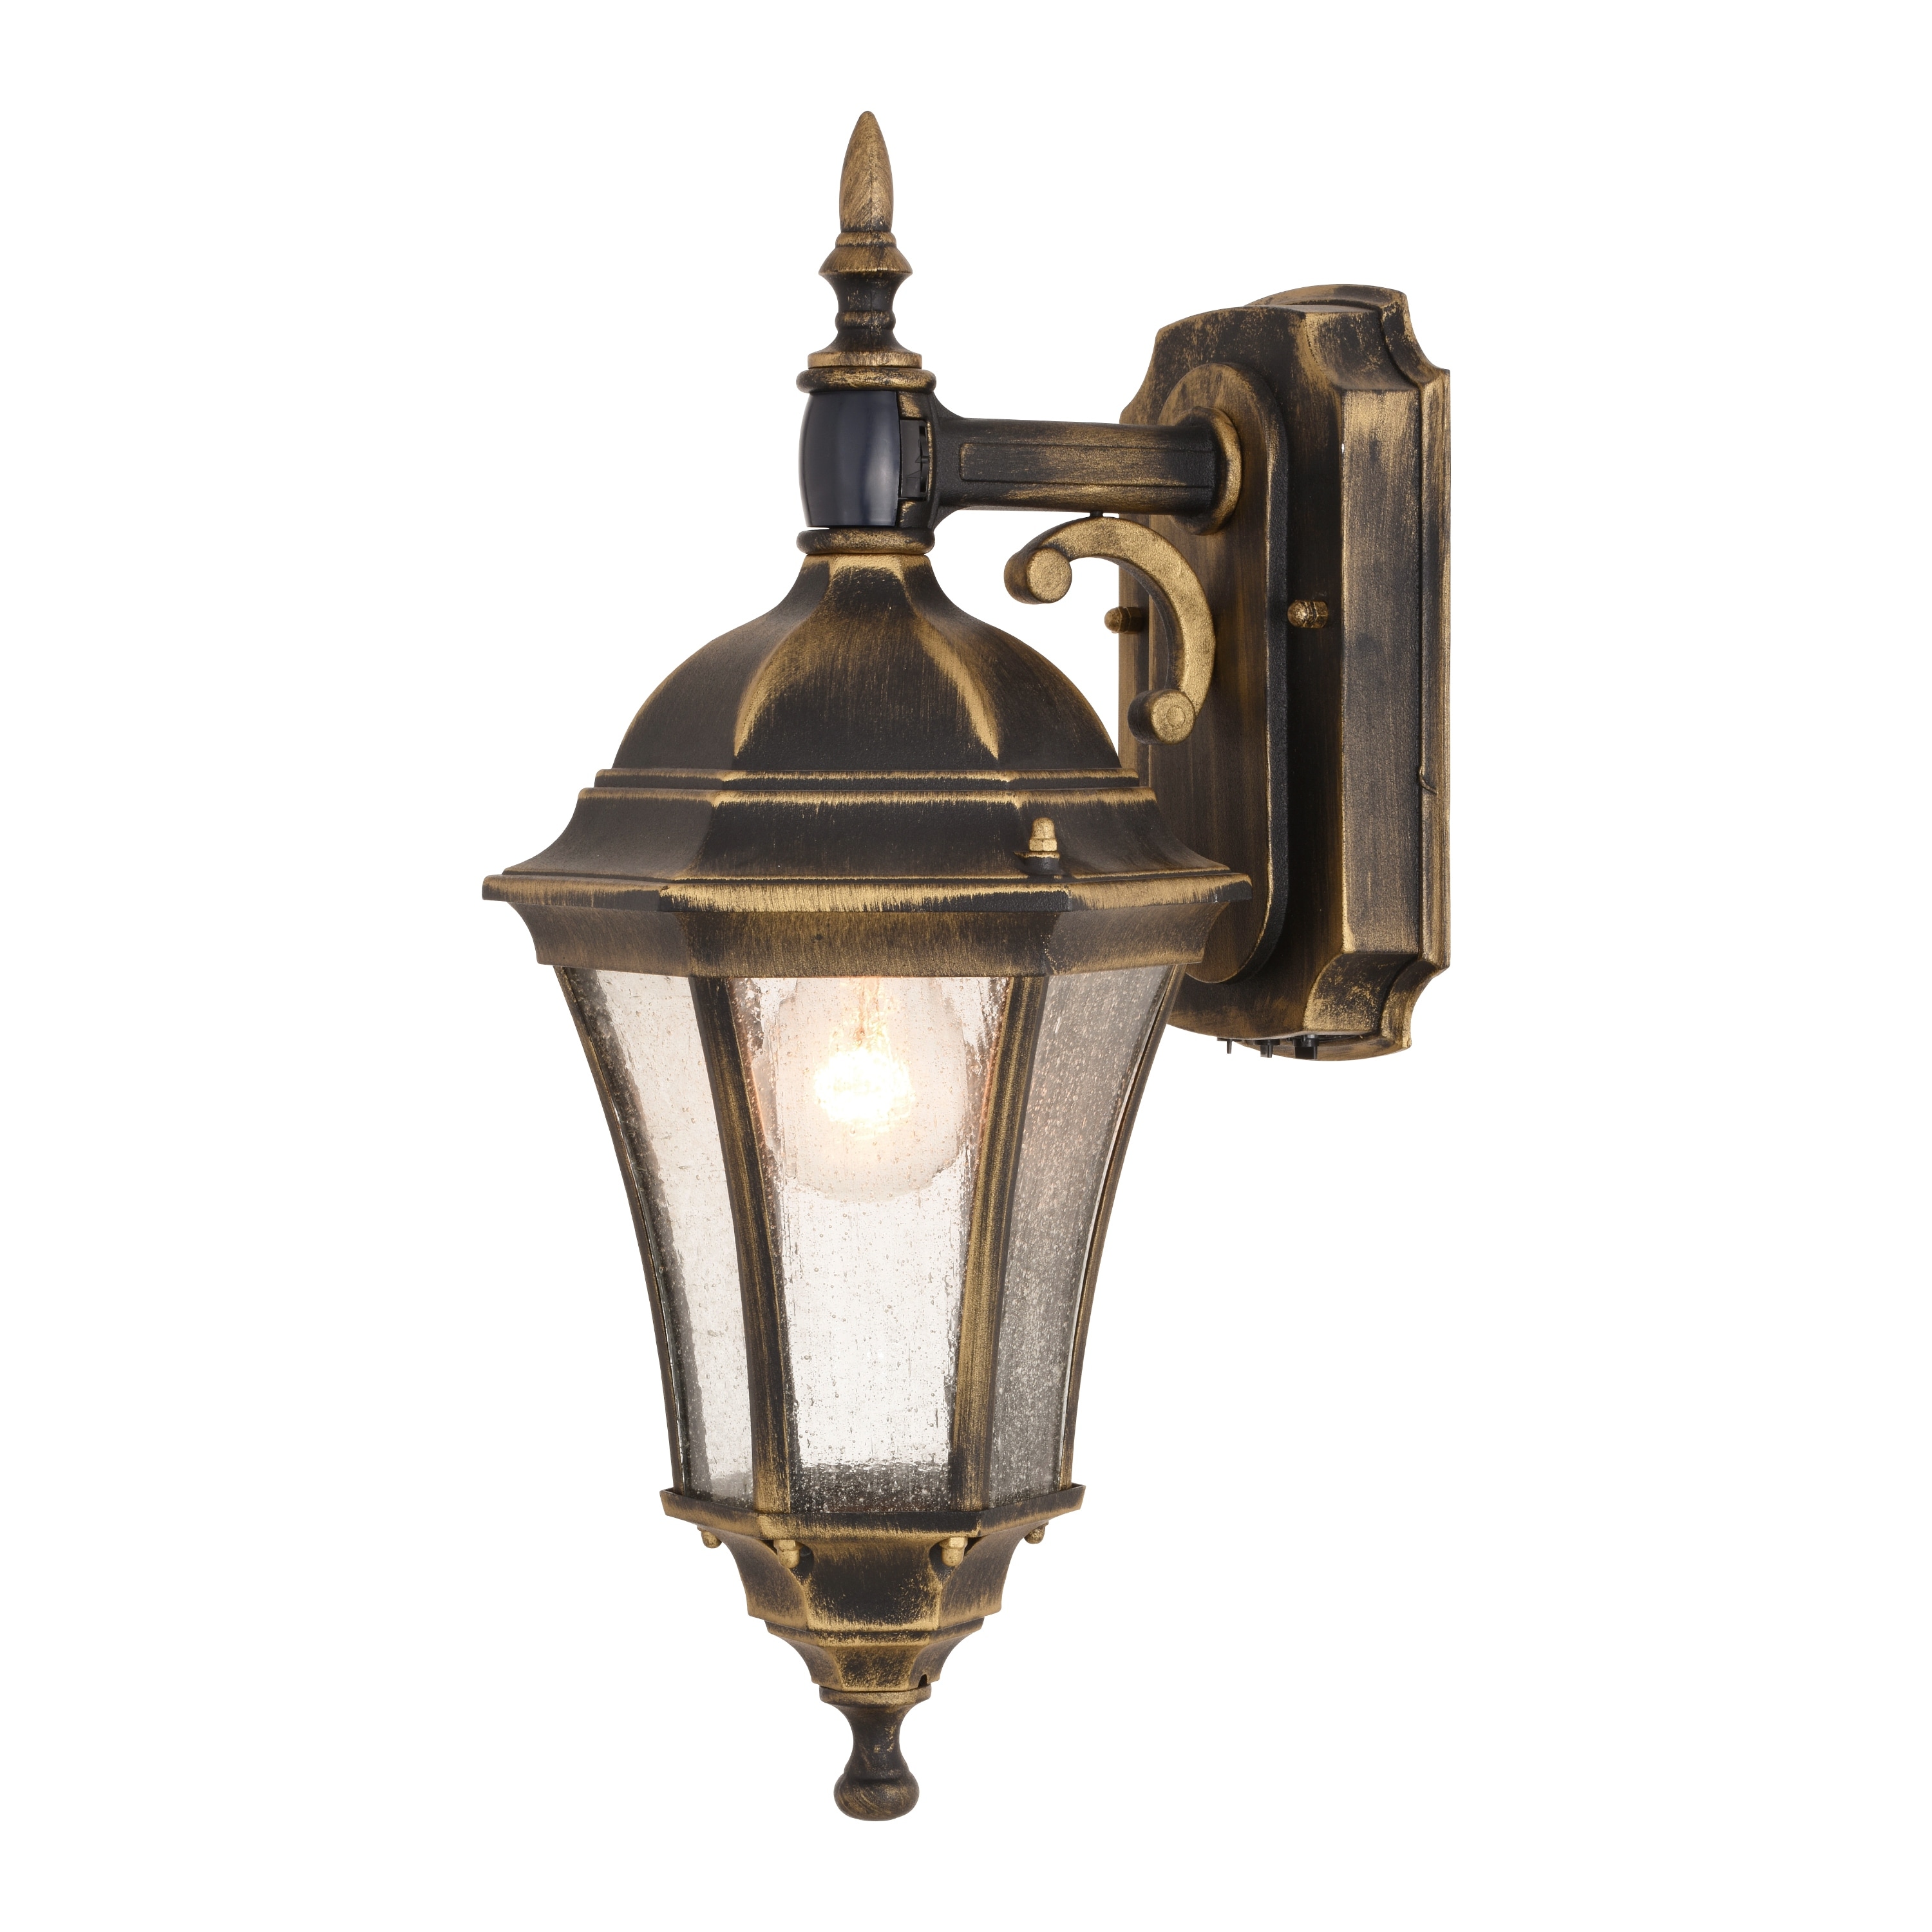 https://ak1.ostkcdn.com/images/products/is/images/direct/c0e2b7dad3ef16f7940e959ae102833cfe1daf48/Newark-Weathered-Bronze-Motion-Sensor-Dusk-to-Dawn-Traditional-Outdoor-Wall-Light-with-Clear-Glass.jpg